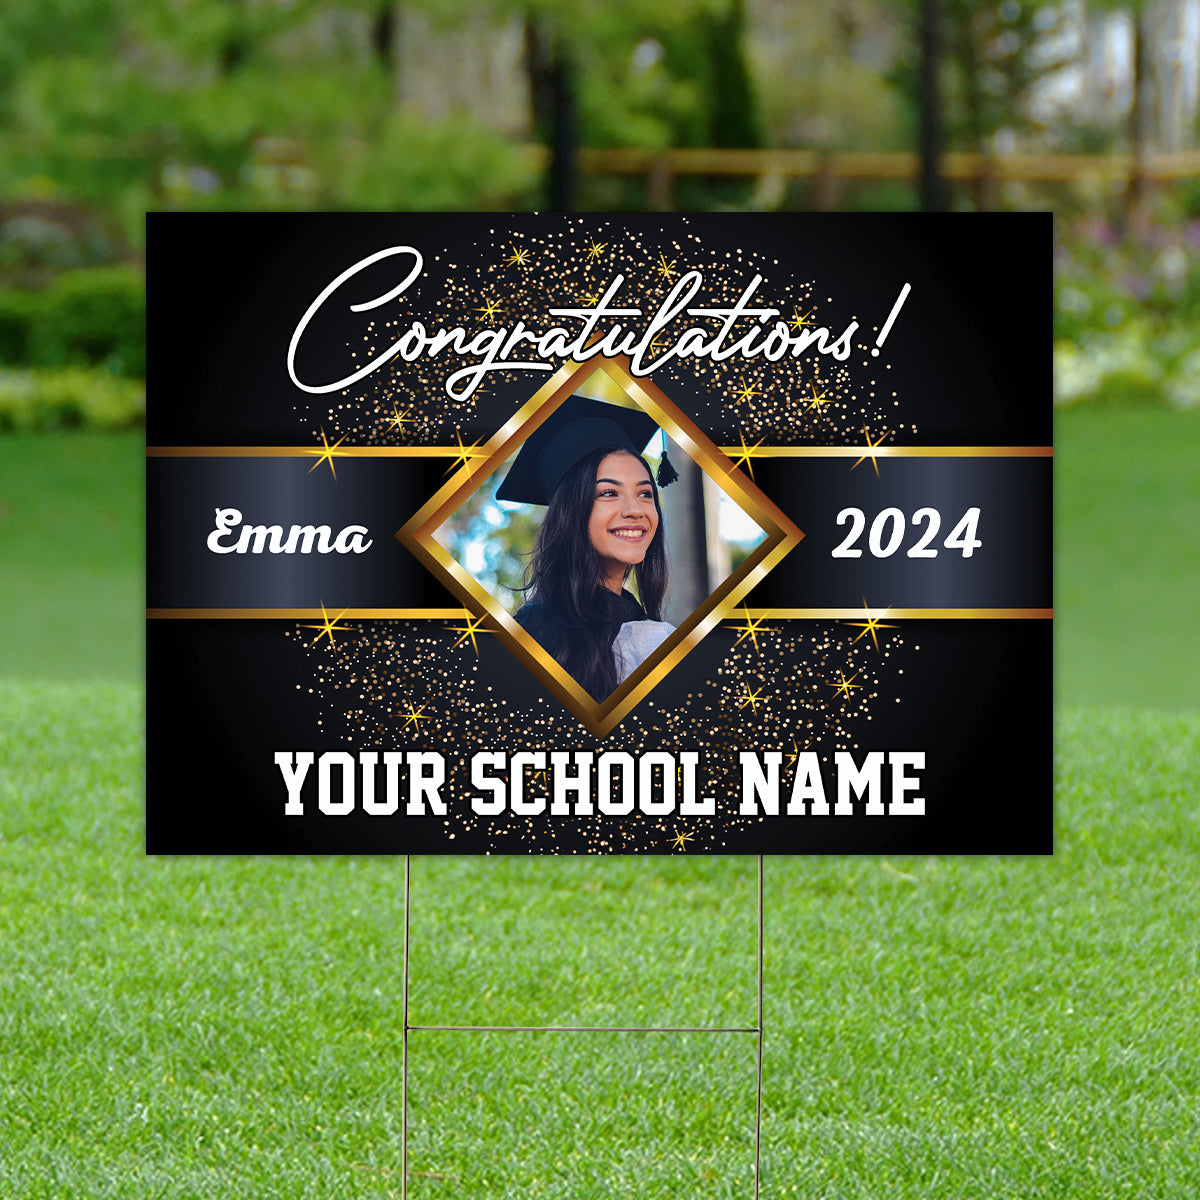 Congratulations, Custom School Name, Your Name, Year And Photo, Personalized Lawn Sign, Yard Sign, Gift For Graduation